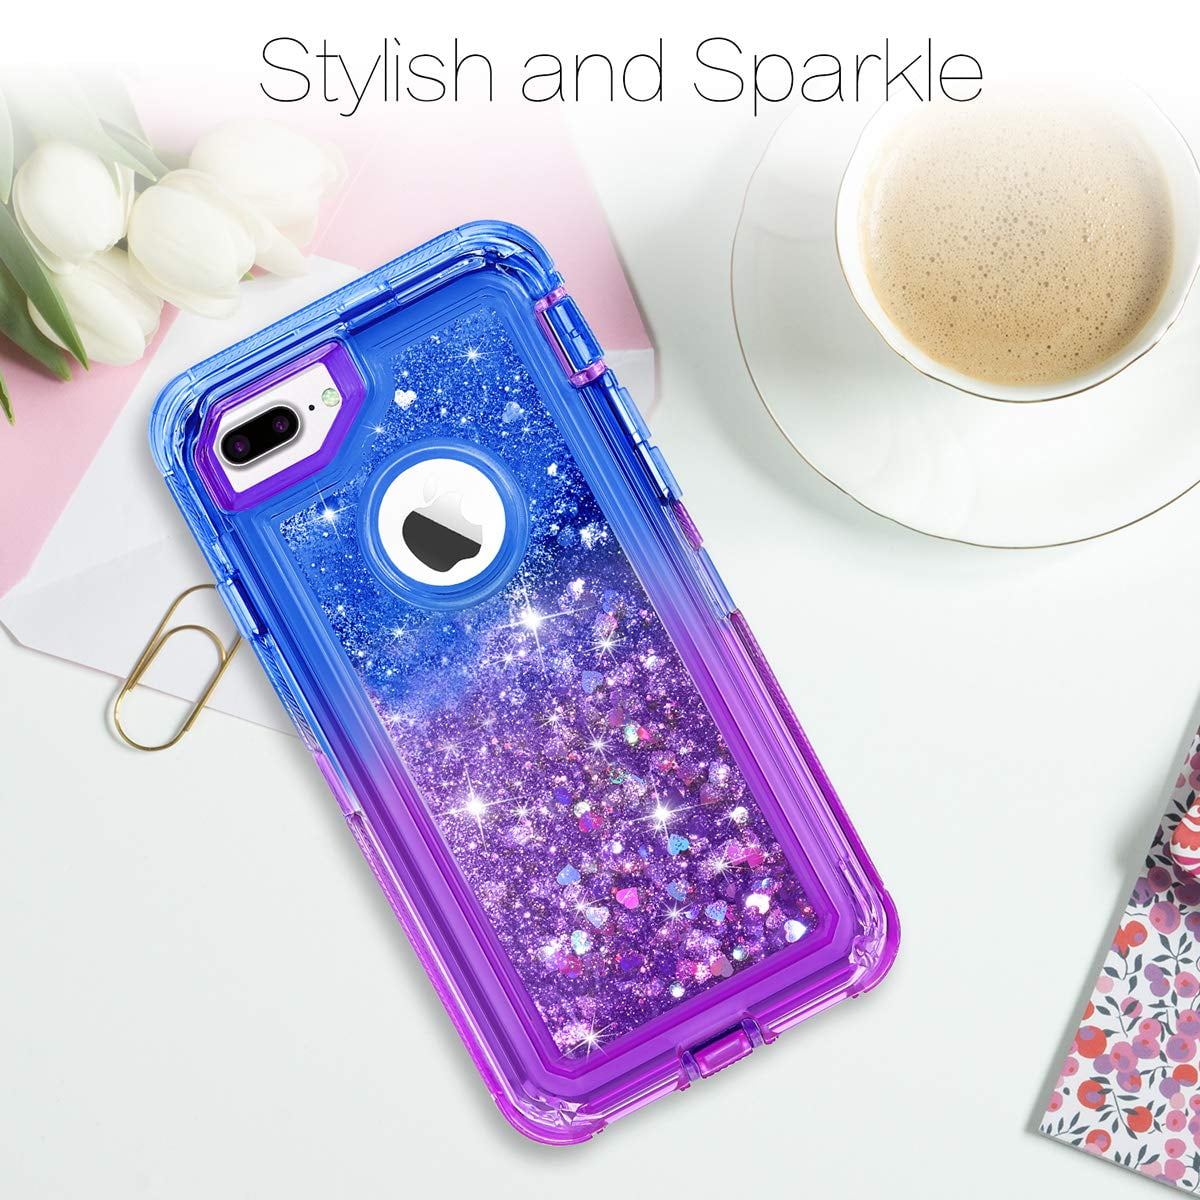 Modes Wireless - Sparkling Silicone iPhone Cover Plus 6/6S 8 iPhone Apple for Plus iPhone Plus / 7 / Case